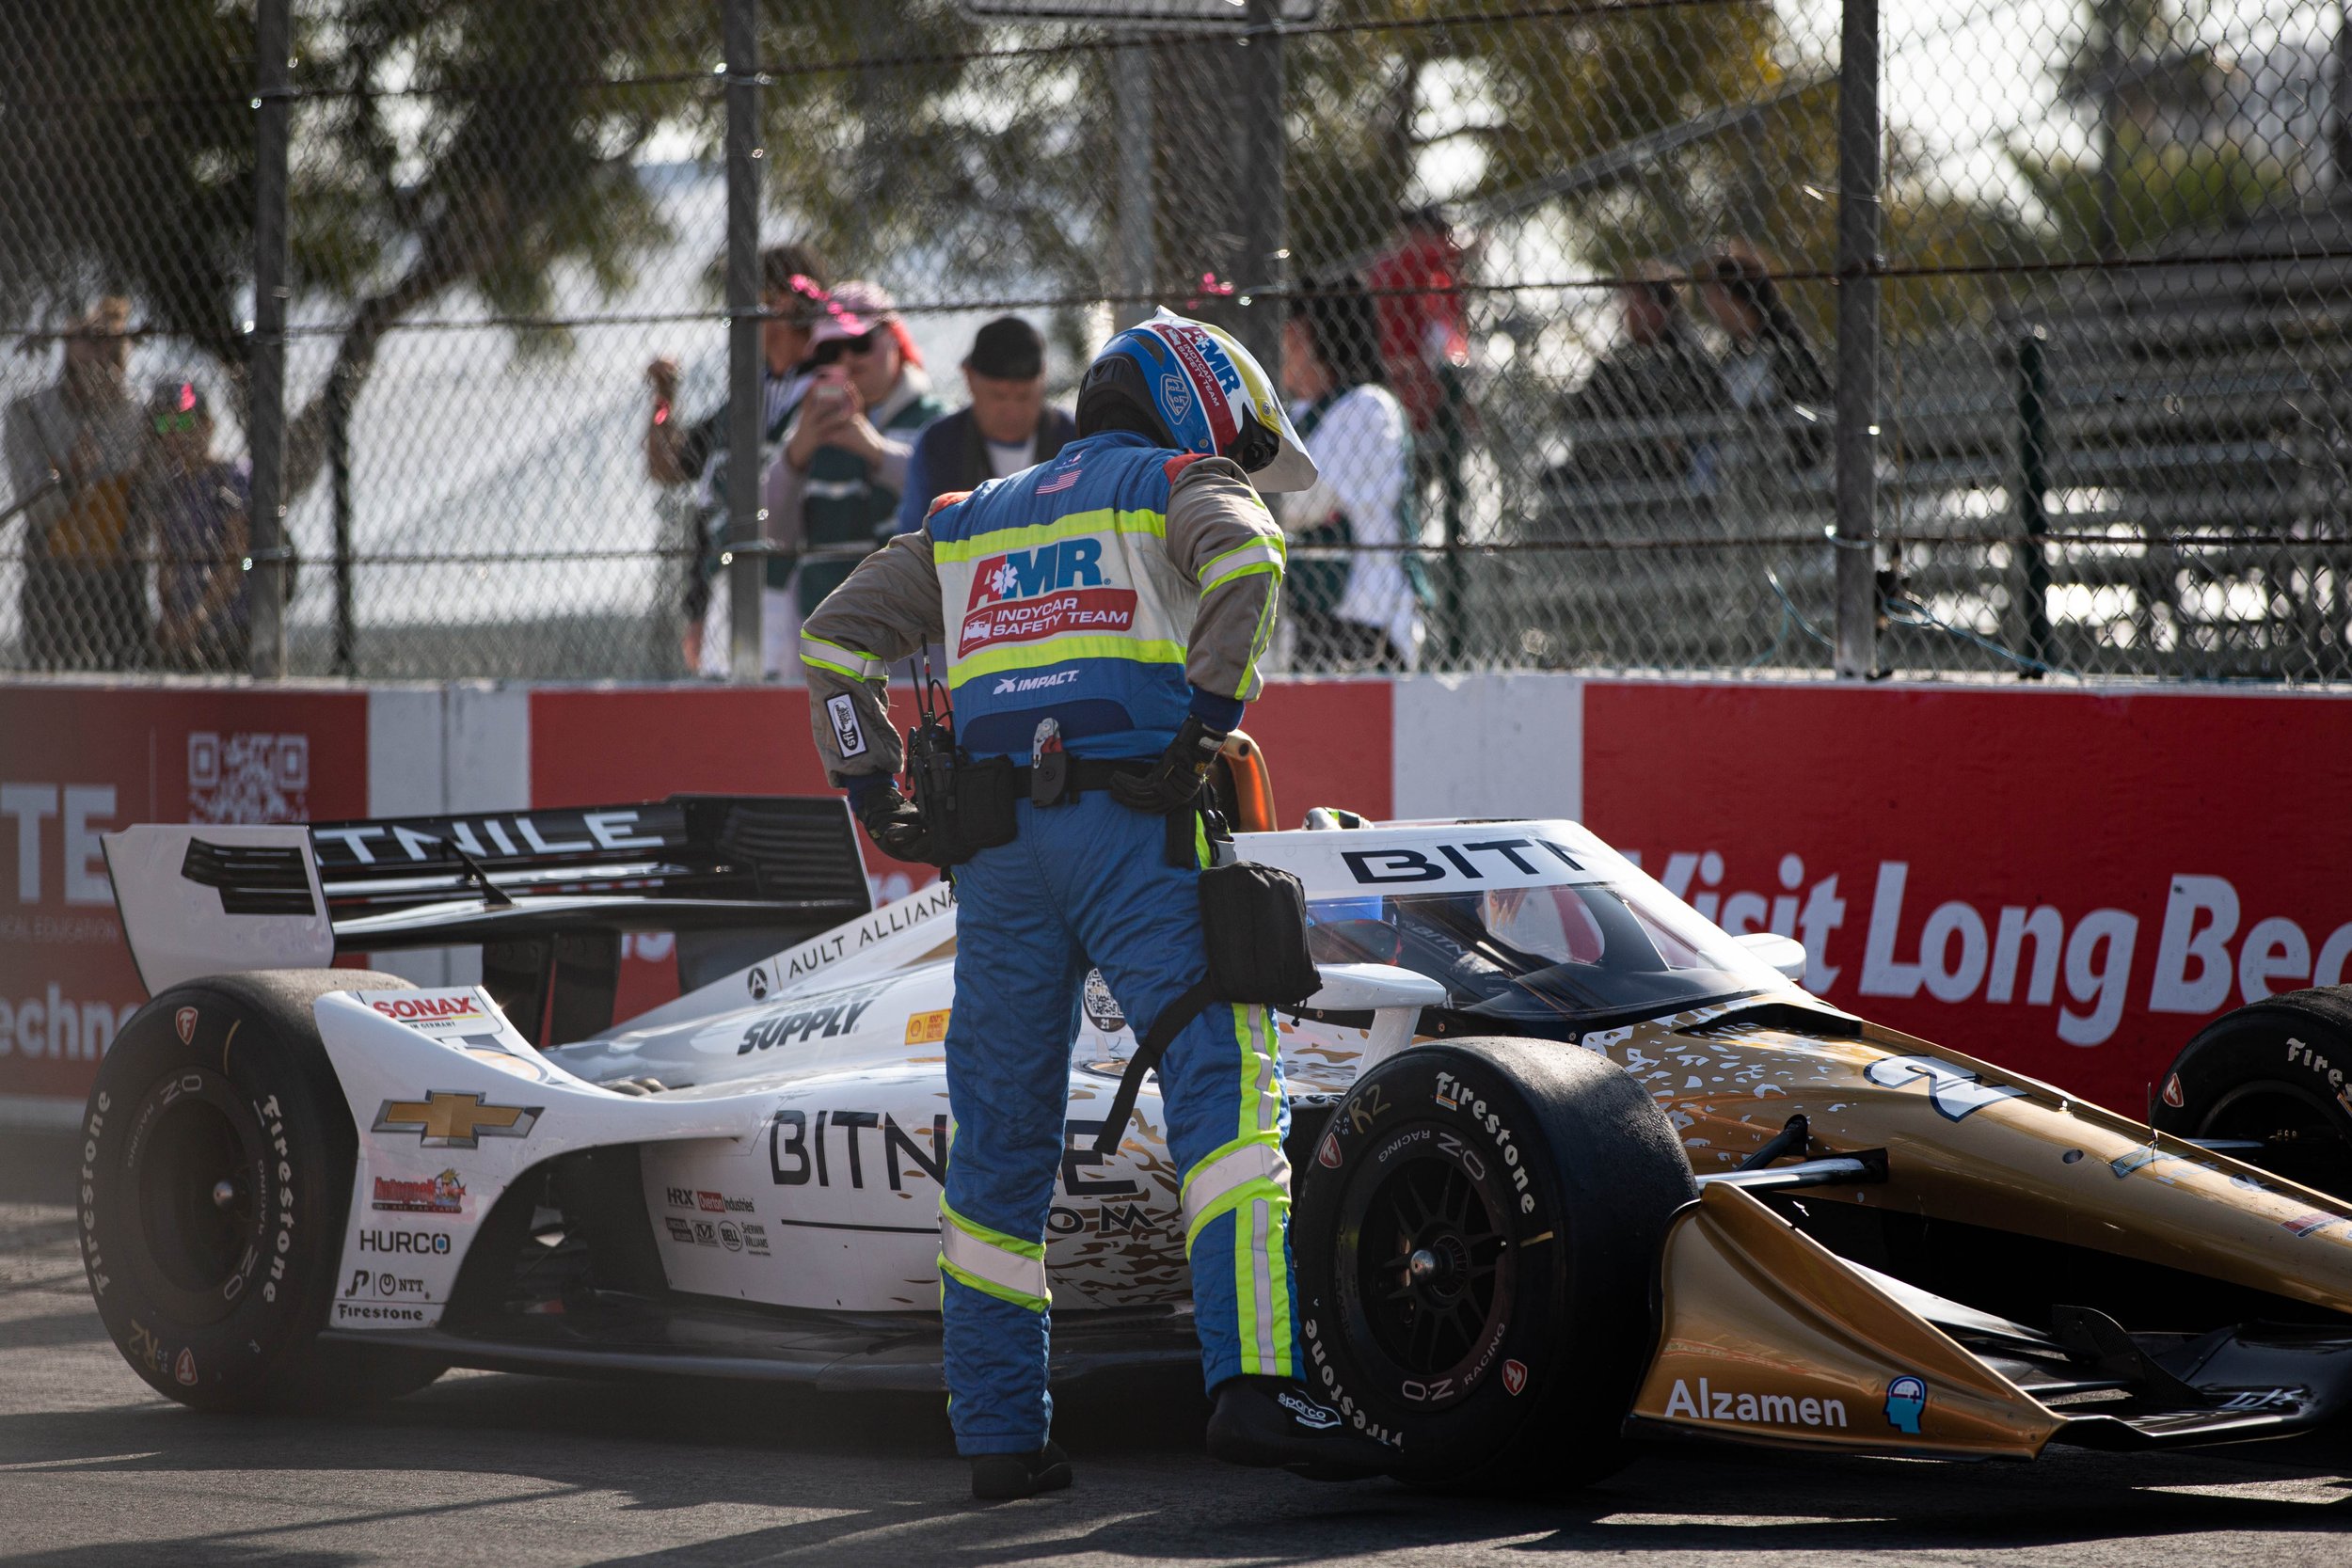  American Medical Response(AMR) personel checking on Conor Daly after his vehicle malfunctioned in the middle of the track during the NTT Indycar Series practice #2 in Acura's 48th Grand Prix on Saturday, April, 15 at Long Beach, Calif. (Danilo Perez